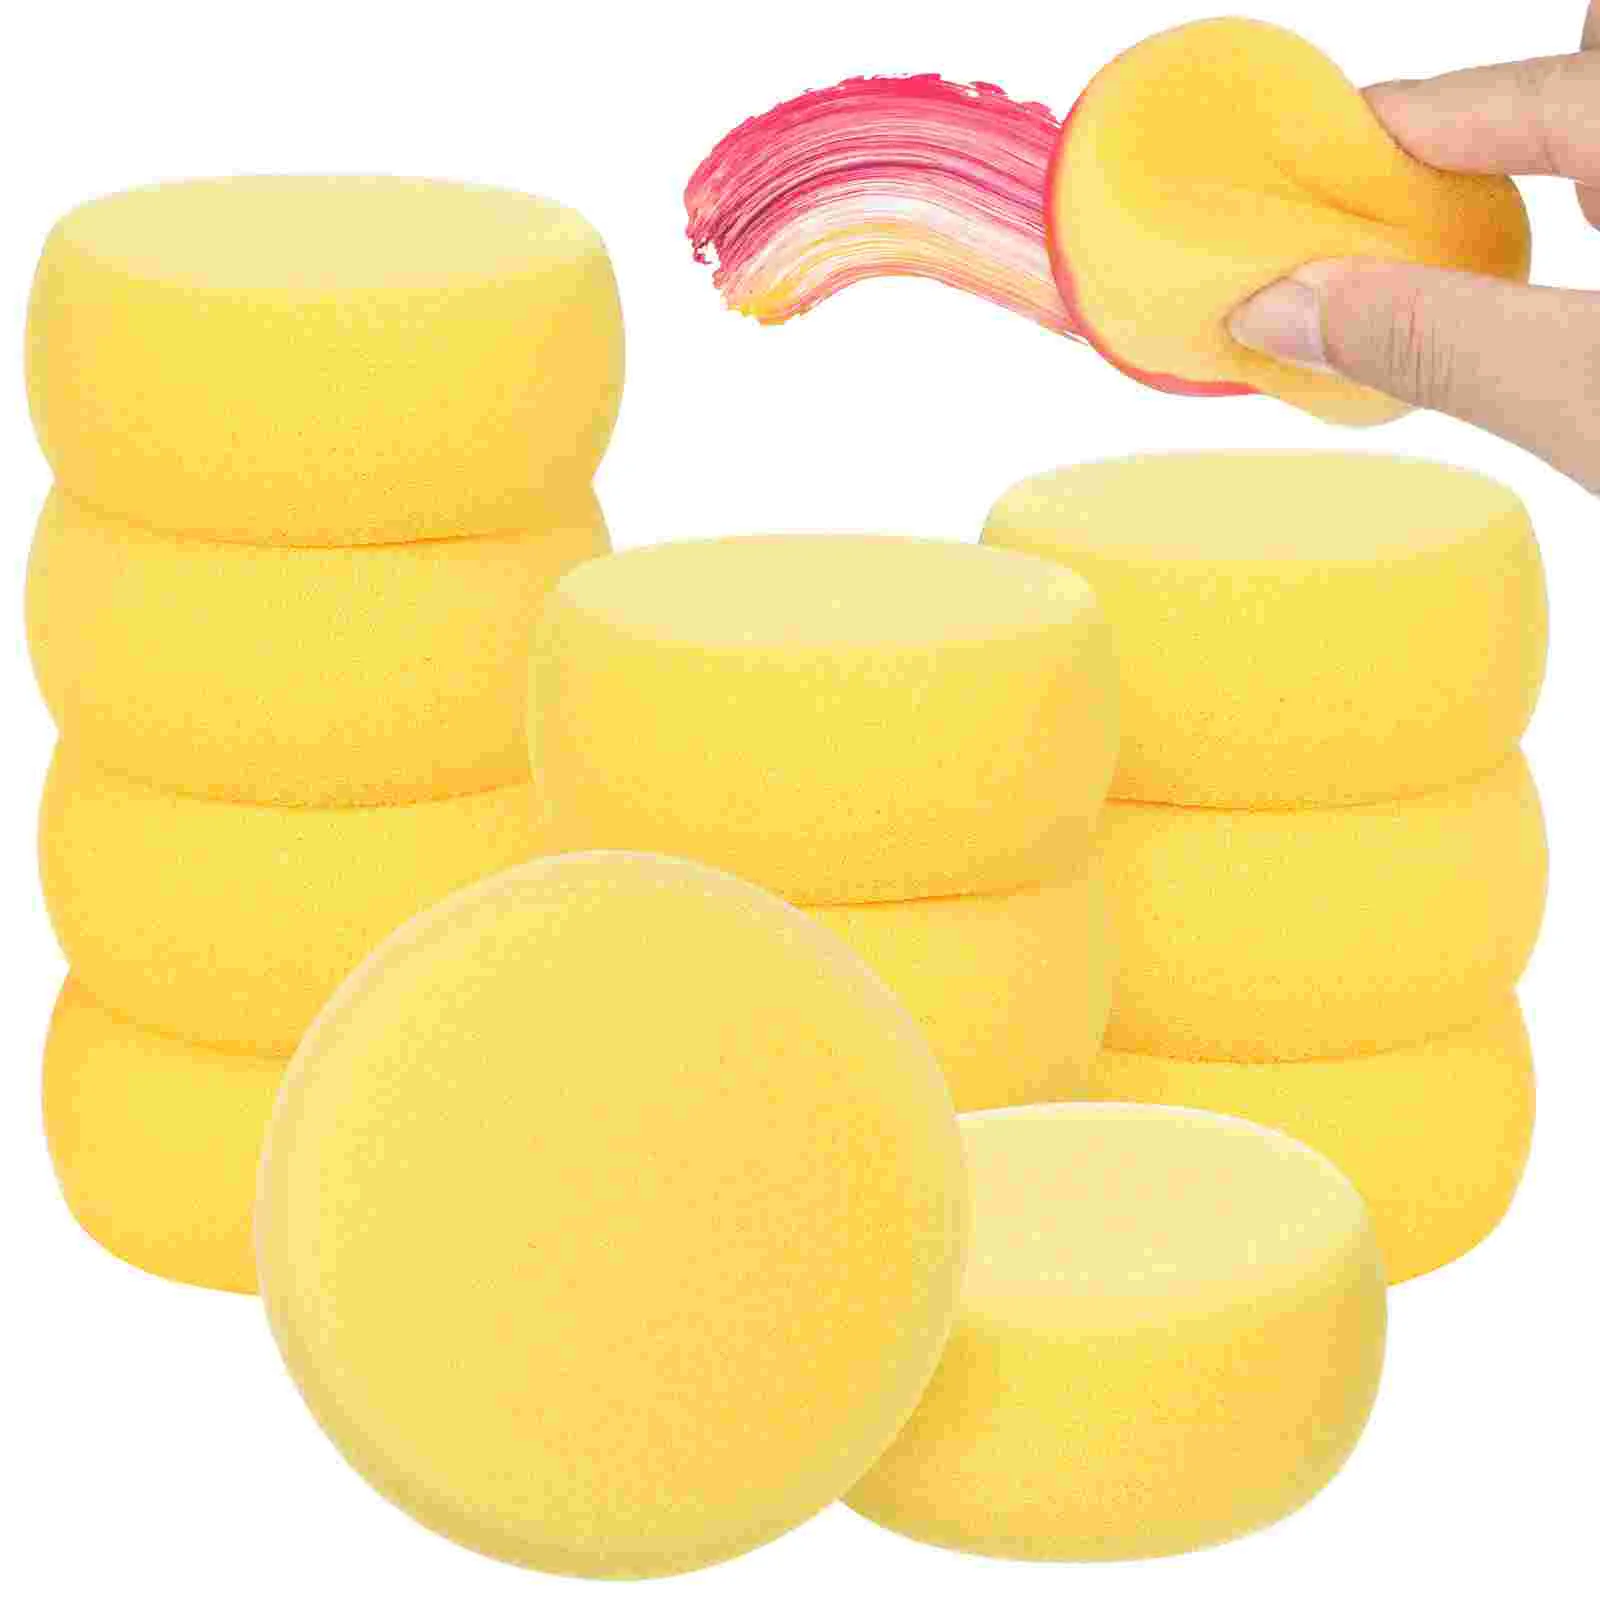 12pcs Painting Sponges Round Synthetic Artist Sponges Watercolor Sponges for Painting Crafts ( Yellow )